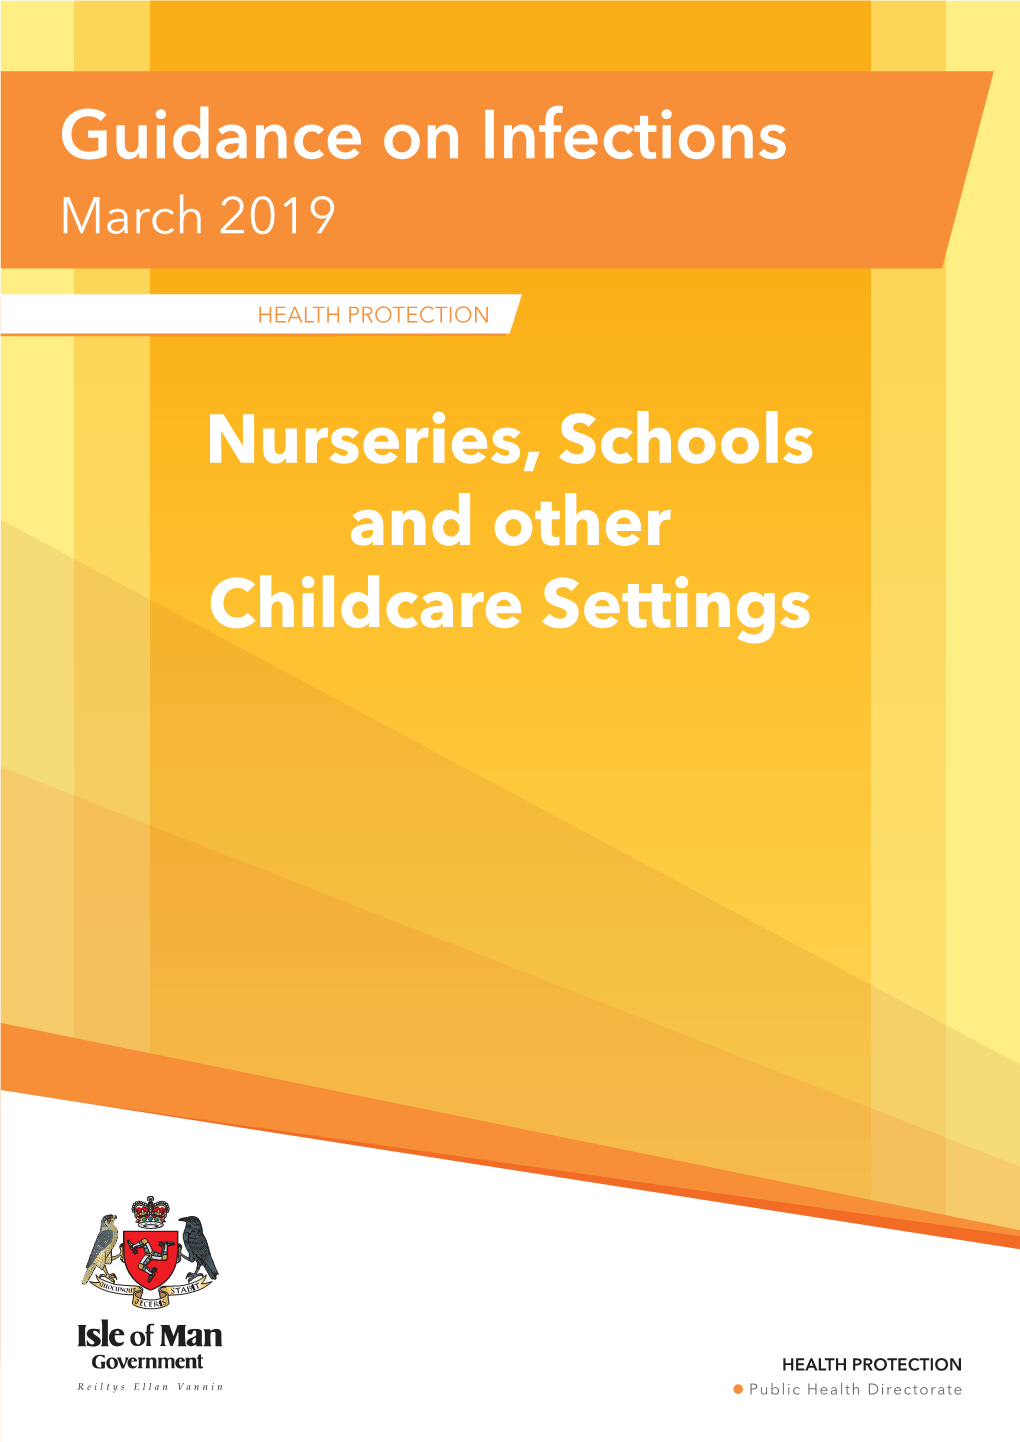 Guidance on Infections Nurseries, Schools and Other Childcare Settings